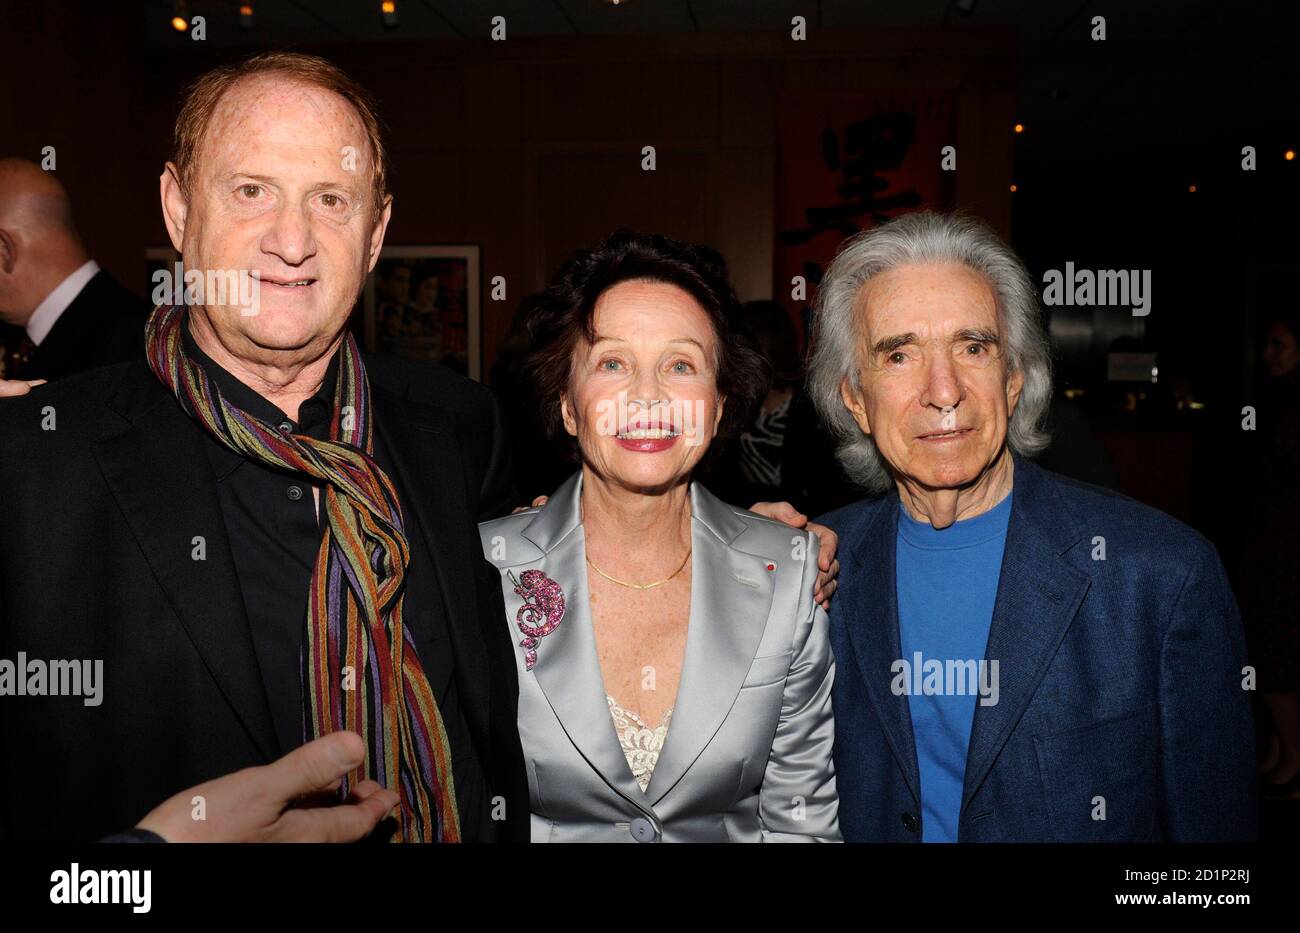 Producer Mike Medavoy (L), actress Leslie Caron (C) and director Arthur Hiller attend 'An Academy Salute to Leslie Caron' at the Academy of Motion Picture Arts and Sciences in Beverly Hills, California October 10, 2008. REUTERS/Phil McCarten (UNITED STATES) Stock Photo